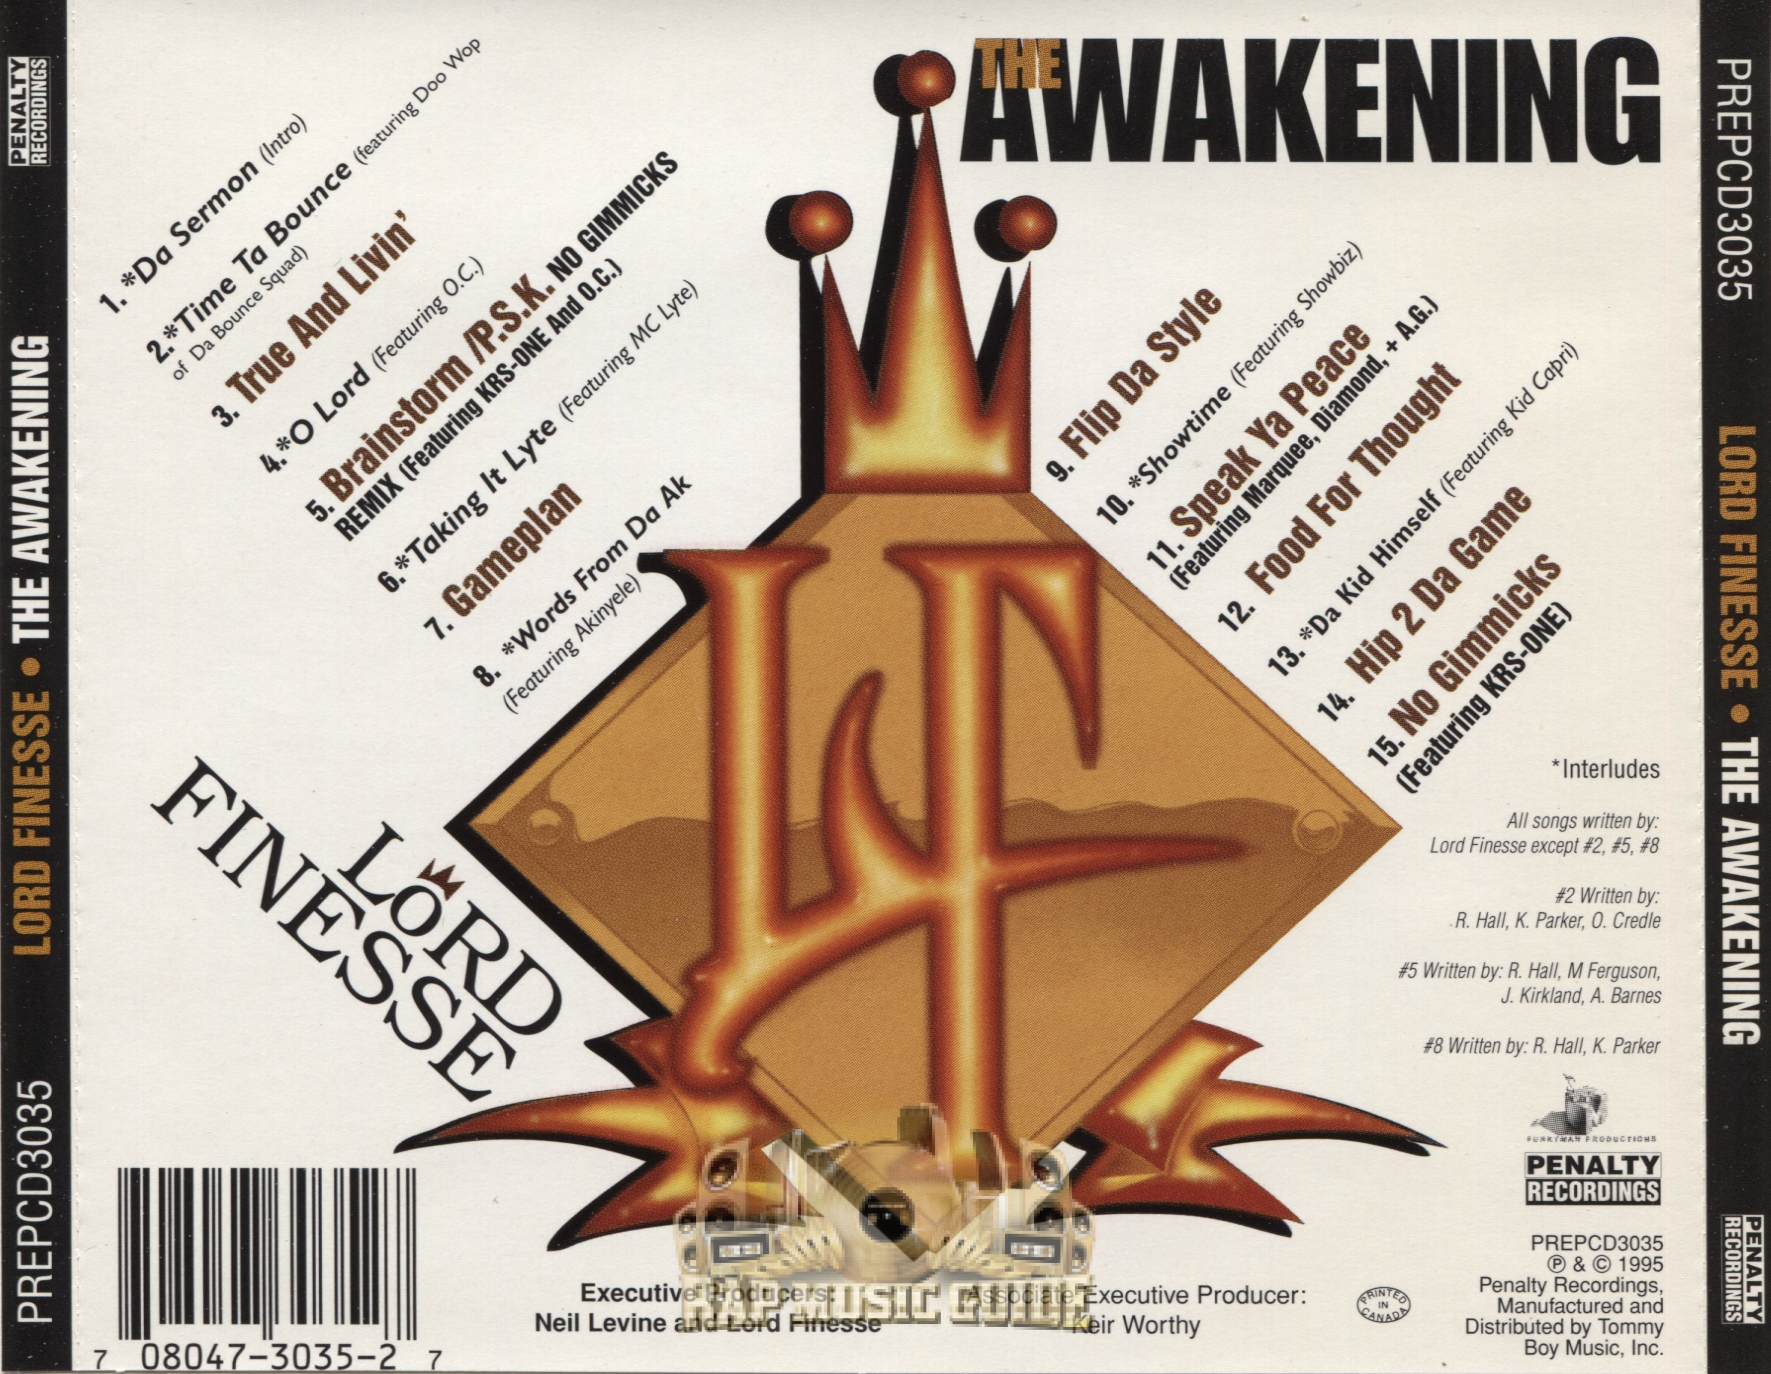 Lord Finesse - The Awakening: CD | Rap Music Guide